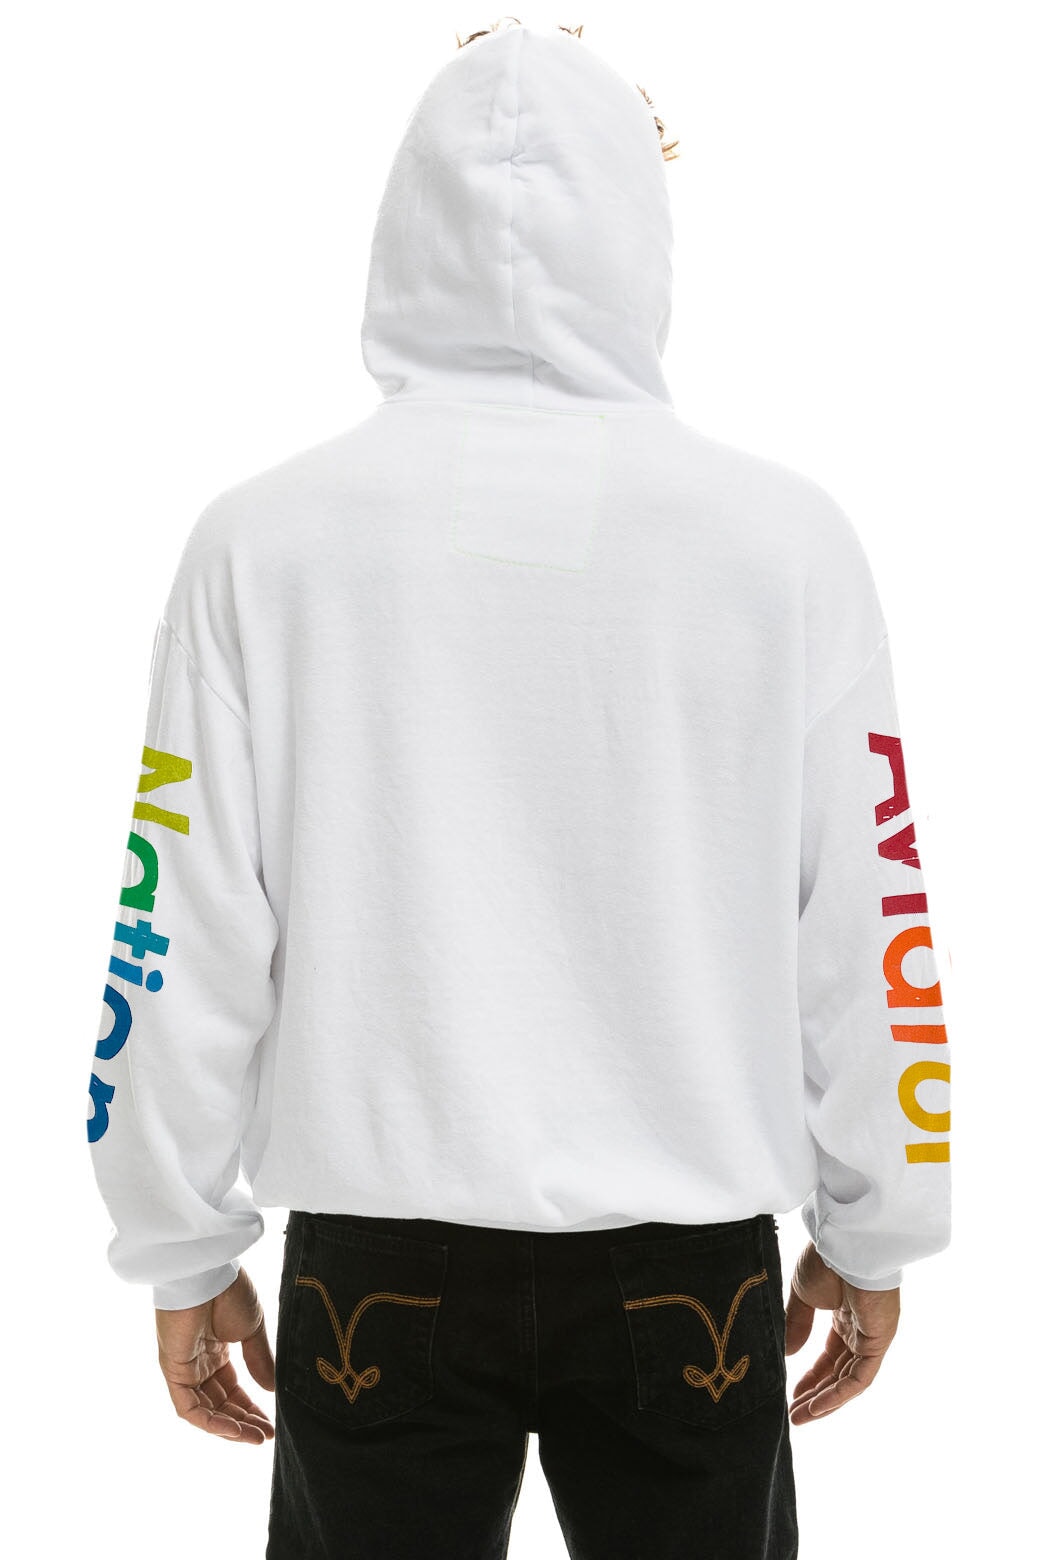 AVIATOR NATION SAN FRANCISCO RELAXED PULLOVER HOODIE - WHITE Hoodie Aviator Nation 